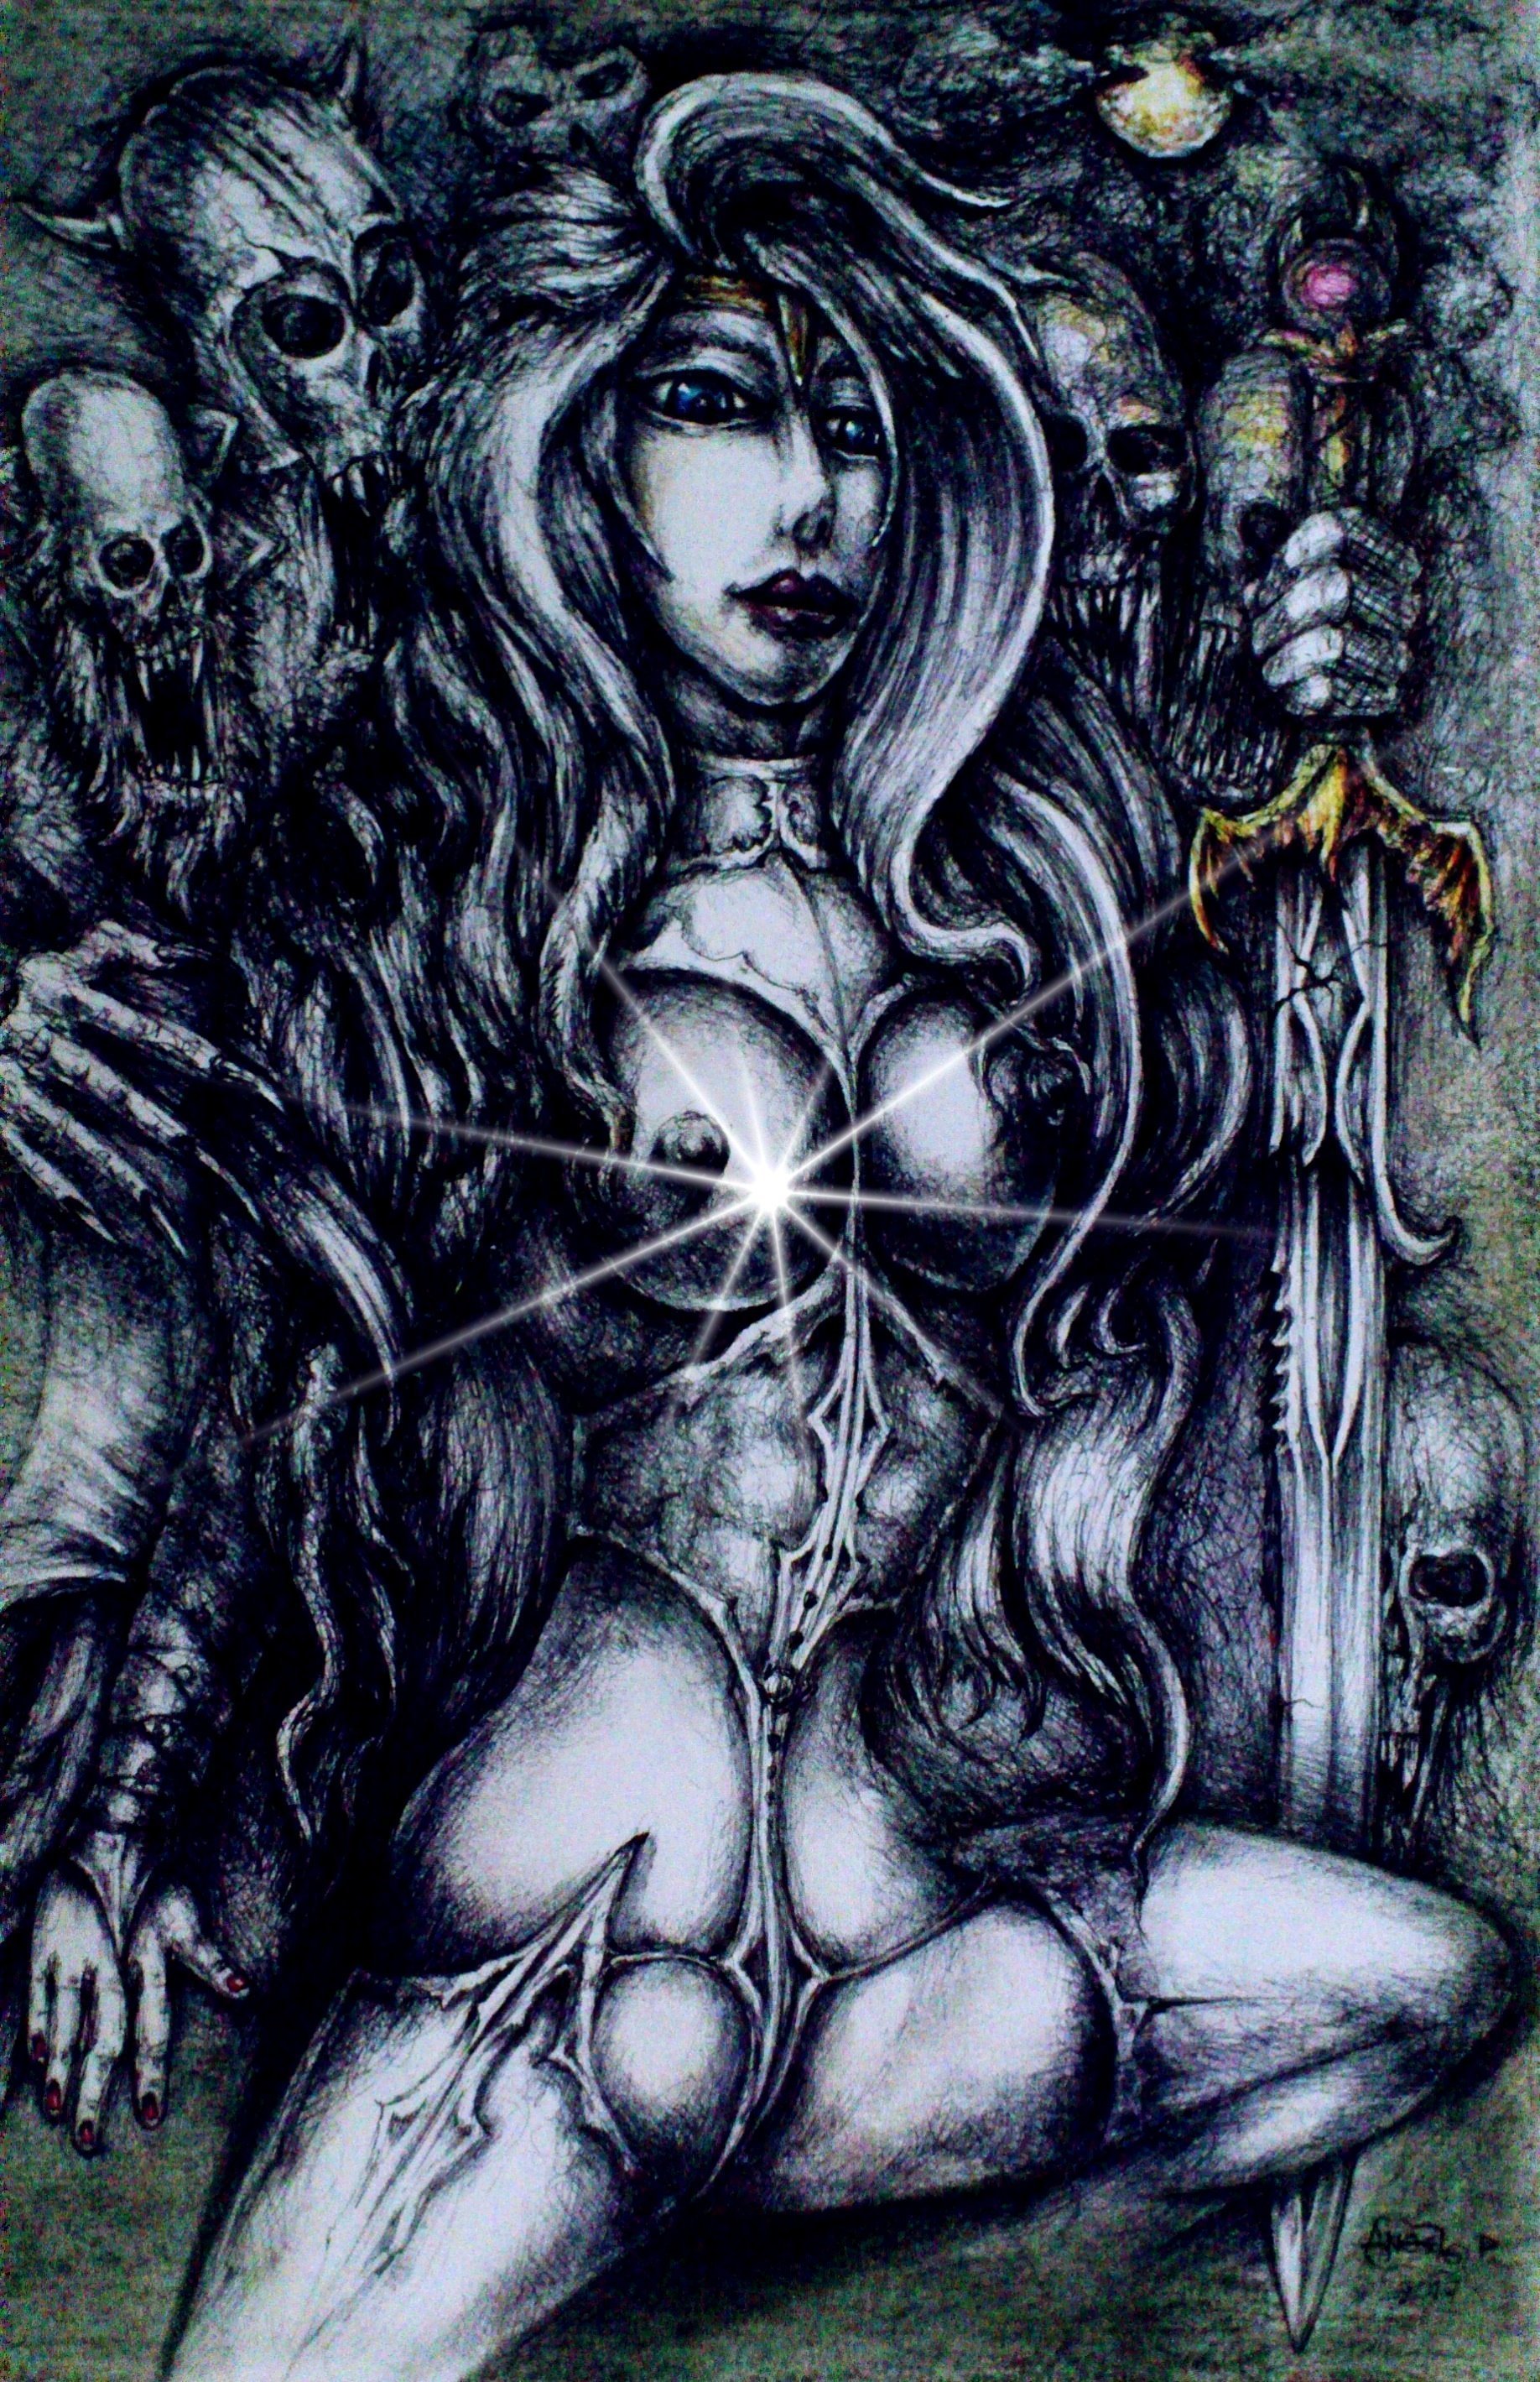 Angel Piangelo Papangelou, 'A GLIMPSE OF DARKNESS', 2016, original Drawing, 35 x 50  x 1 cm. Artwork description: 1758 Fantasy Medieval Dark Sexy Hot - mixed Technique with permanent black pens and color pencils - Heavy Hard Aquarelle paper 200 gr - Original Angel P.  Artwork 2016 - a black wooden Frame is included, which means that the Artwork is ready for the wall - COPY PROTECTED PHOTO with a Lens ...